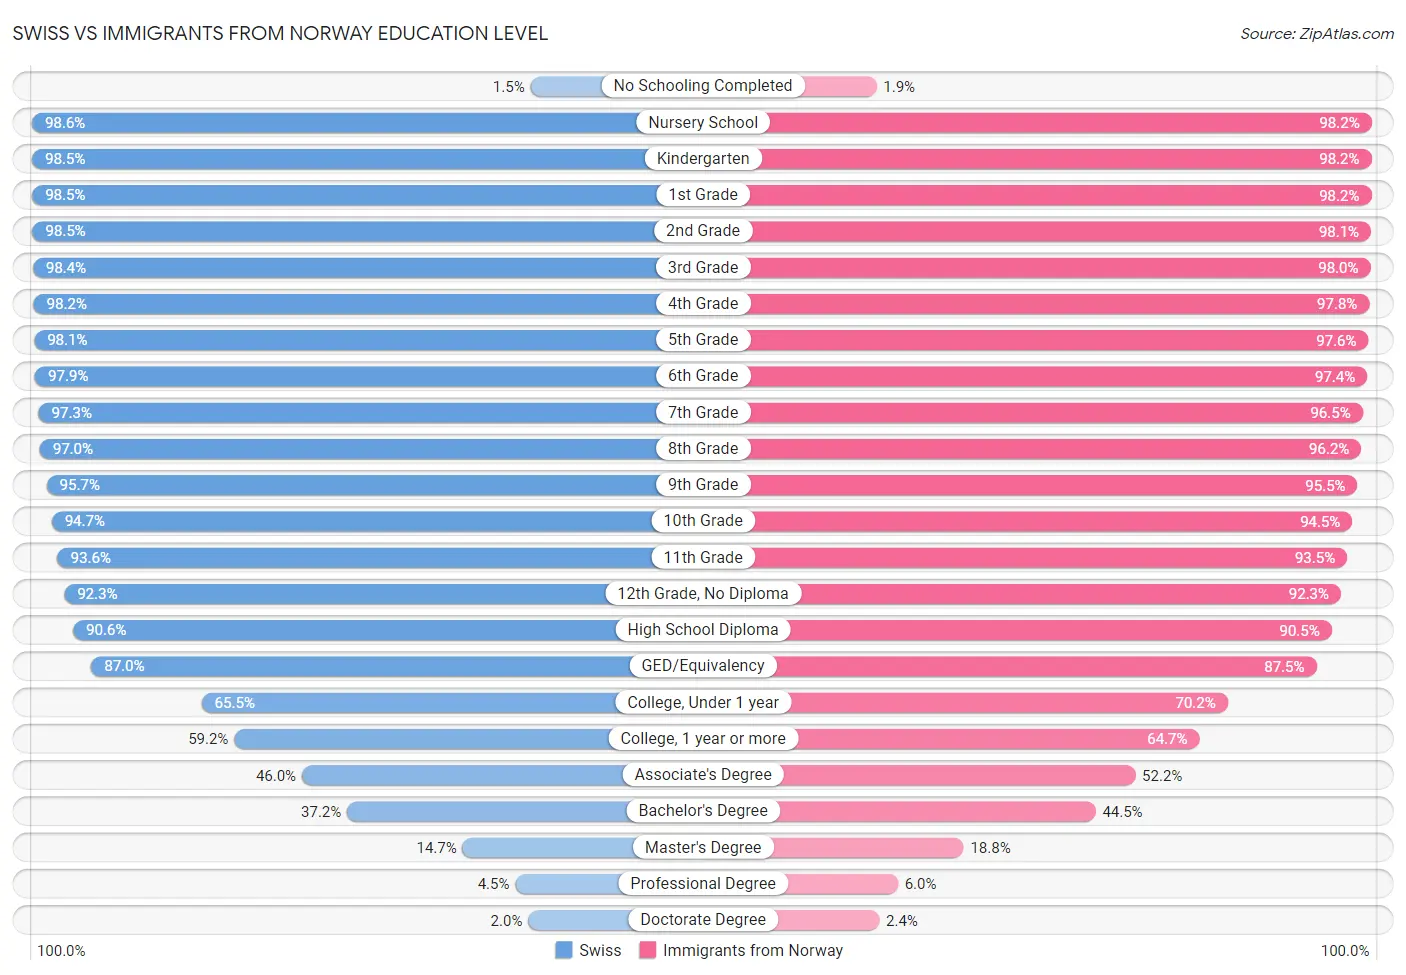 Swiss vs Immigrants from Norway Education Level